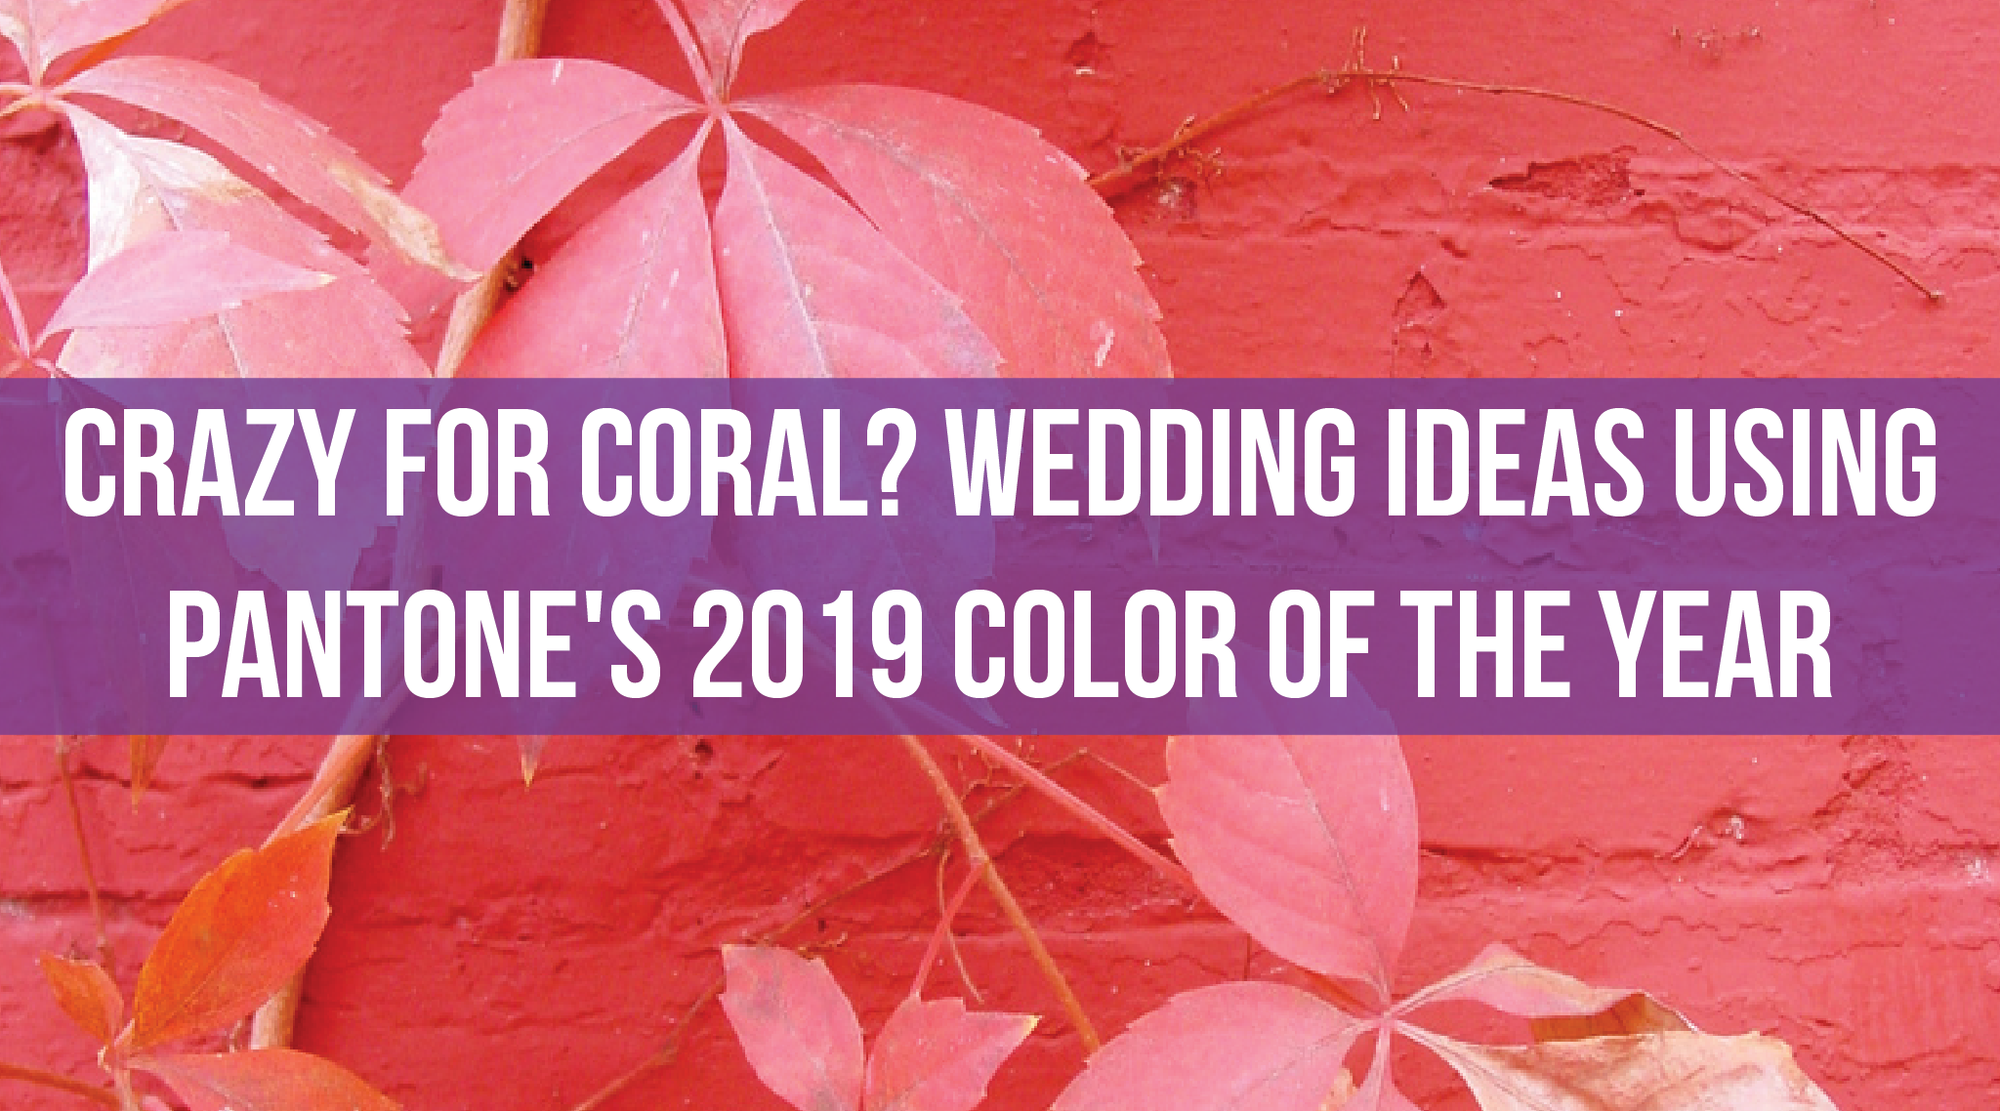 Crazy for Coral? Wedding Ideas Using Pantone's Color of the Year